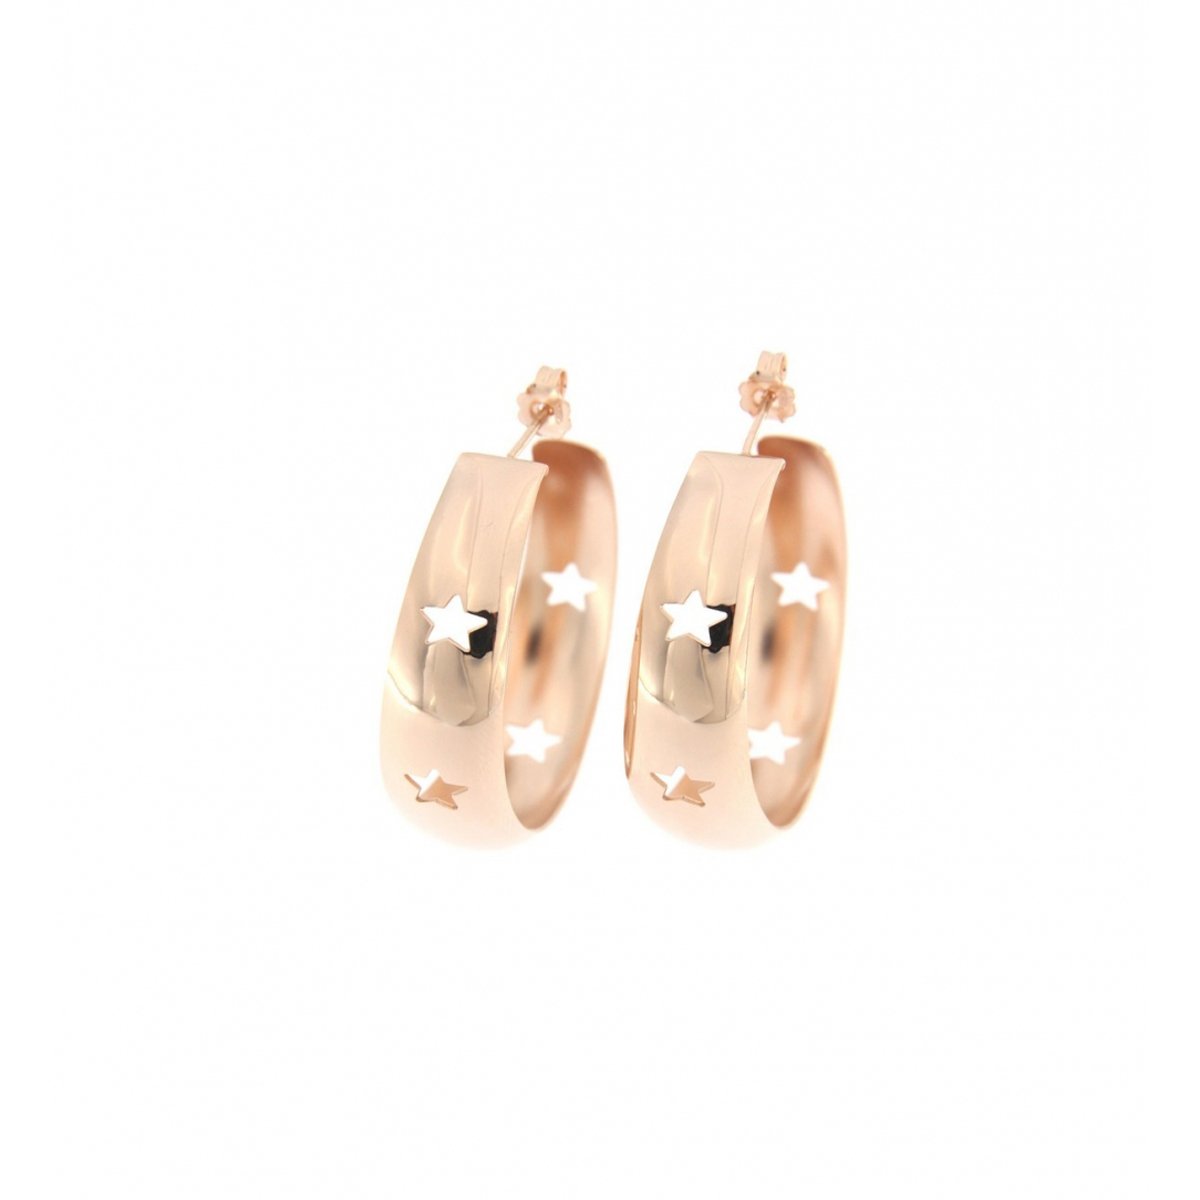 Earrings - Hoop Earrings with Rounded Small Openwork Subject - Star - 1 | Rue des Mille